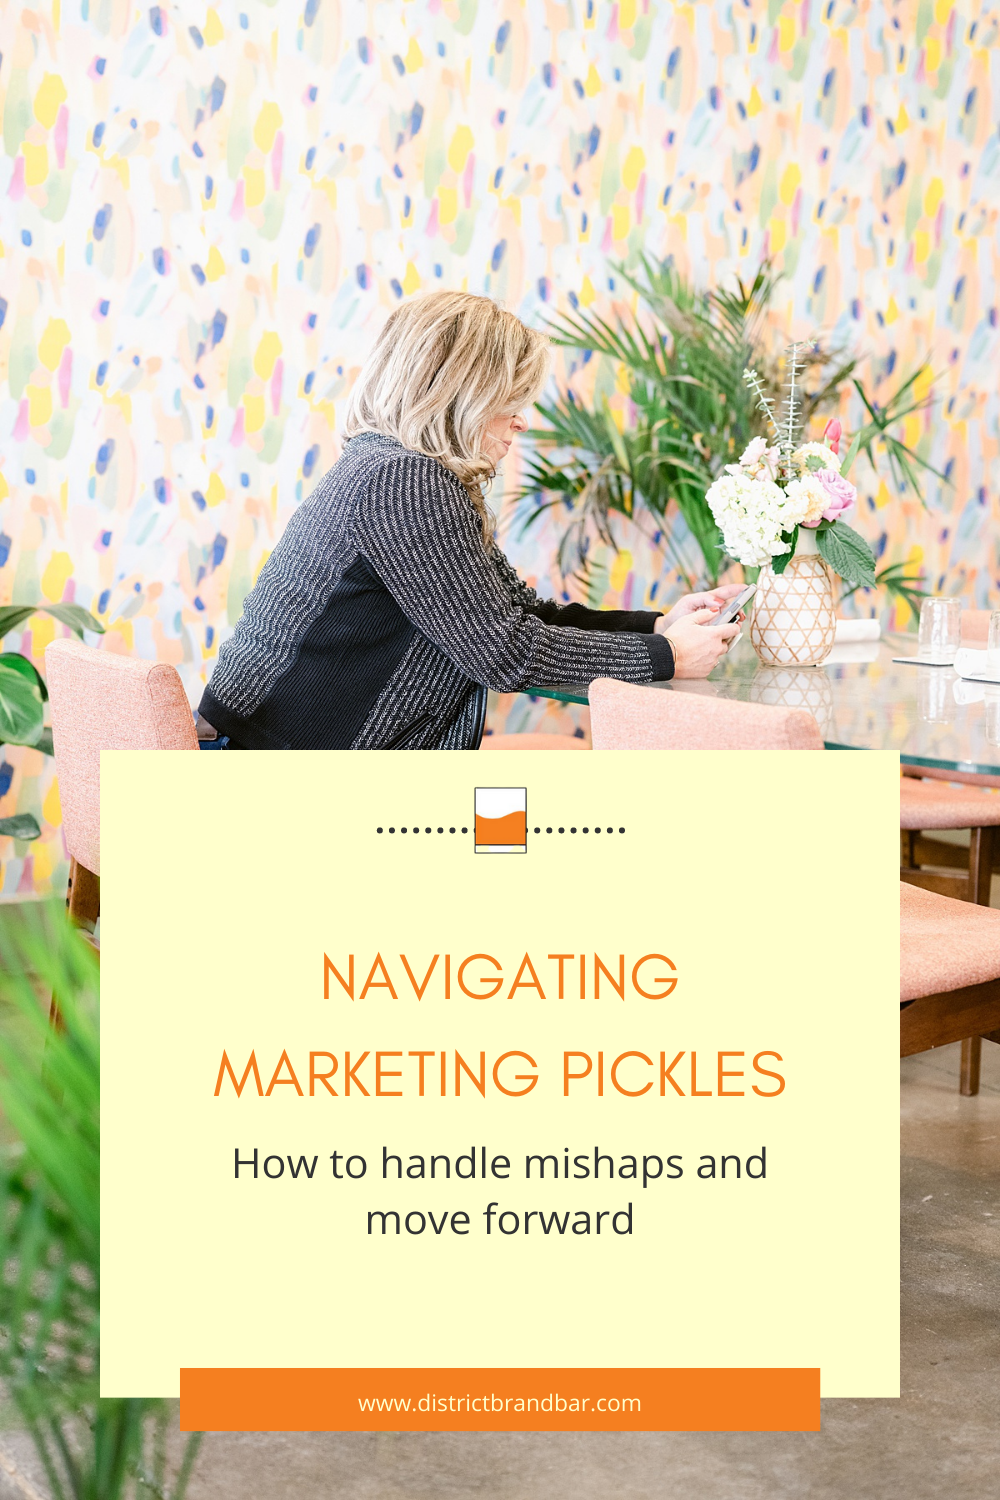 Navigating Marketing Pickles: How to Handle Mishaps and Move Forward